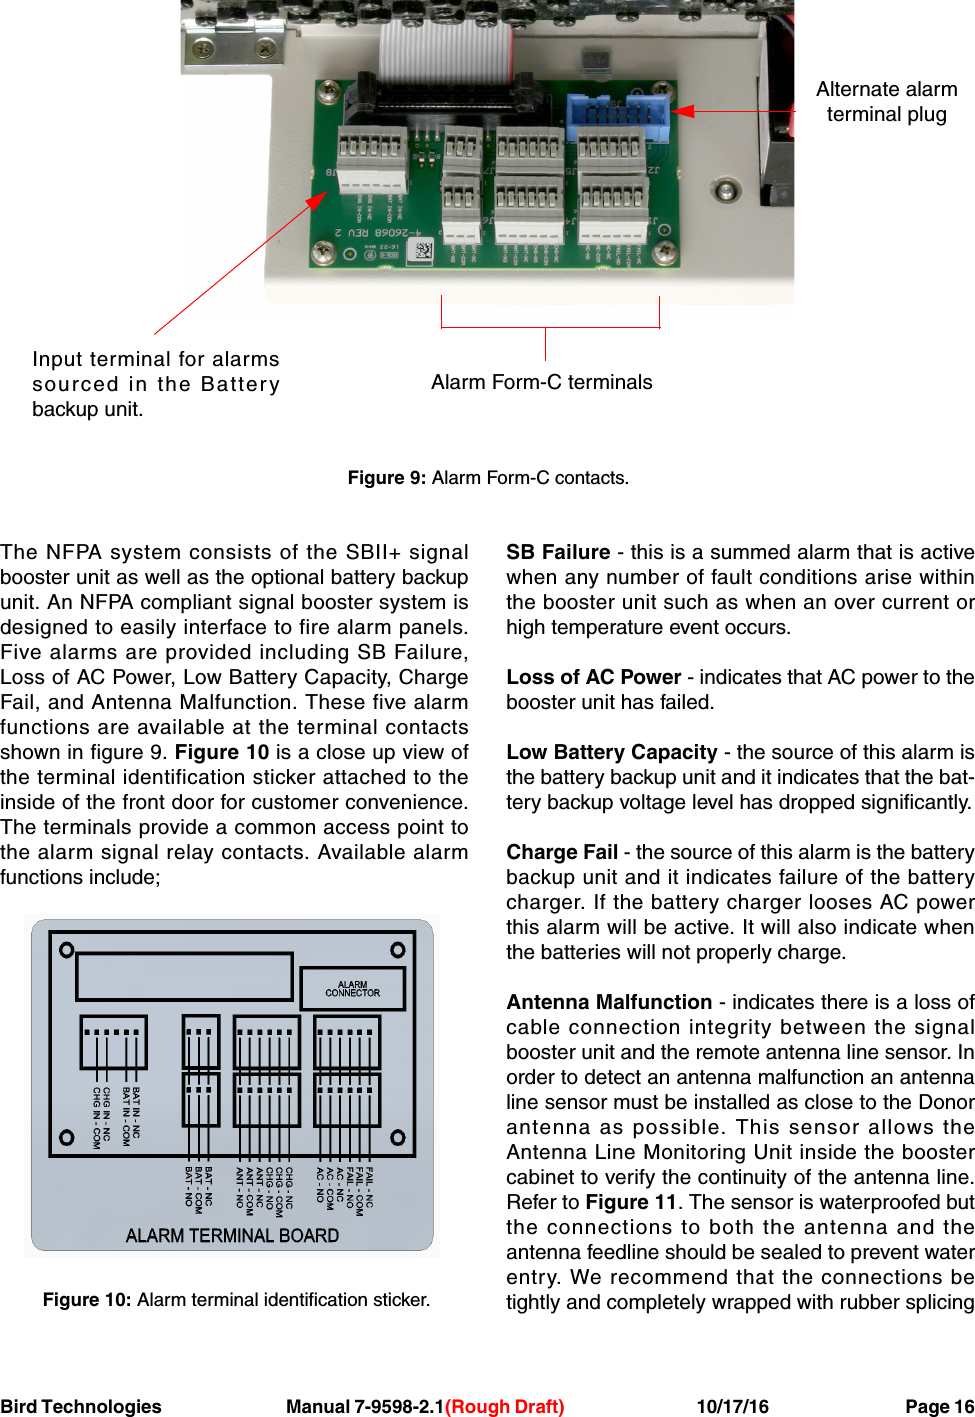 Bird Technologies Manual 7-9598-2.1(Rough Draft) 10/17/16           Page 16The NFPA system consists of the SBII+ signalbooster unit as well as the optional battery backupunit. An NFPA compliant signal booster system isdesigned to easily interface to fire alarm panels.Five alarms are provided including SB Failure,Loss of AC Power, Low Battery Capacity, ChargeFail, and Antenna Malfunction. These five alarmfunctions are available at the terminal contactsshown in figure 9. Figure 10 is a close up view ofthe terminal identification sticker attached to theinside of the front door for customer convenience.The terminals provide a common access point tothe alarm signal relay contacts. Available alarmfunctions include;SB Failure - this is a summed alarm that is activewhen any number of fault conditions arise withinthe booster unit such as when an over current orhigh temperature event occurs.Loss of AC Power - indicates that AC power to thebooster unit has failed.Low Battery Capacity - the source of this alarm isthe battery backup unit and it indicates that the bat-tery backup voltage level has dropped significantly.Charge Fail - the source of this alarm is the batterybackup unit and it indicates failure of the batterycharger. If the battery charger looses AC powerthis alarm will be active. It will also indicate whenthe batteries will not properly charge.Antenna Malfunction - indicates there is a loss ofcable connection integrity between the signalbooster unit and the remote antenna line sensor. Inorder to detect an antenna malfunction an antennaline sensor must be installed as close to the Donorantenna as possible. This sensor allows theAntenna Line Monitoring Unit inside the boostercabinet to verify the continuity of the antenna line.Refer to Figure 11. The sensor is waterproofed butthe connections to both the antenna and theantenna feedline should be sealed to prevent waterentry. We recommend that the connections betightly and completely wrapped with rubber splicingFigure 9: Alarm Form-C contacts.Alternate alarmterminal plugInput terminal for alarmssourced in the Batterybackup unit.Alarm Form-C terminalsFigure 10: Alarm terminal identification sticker.